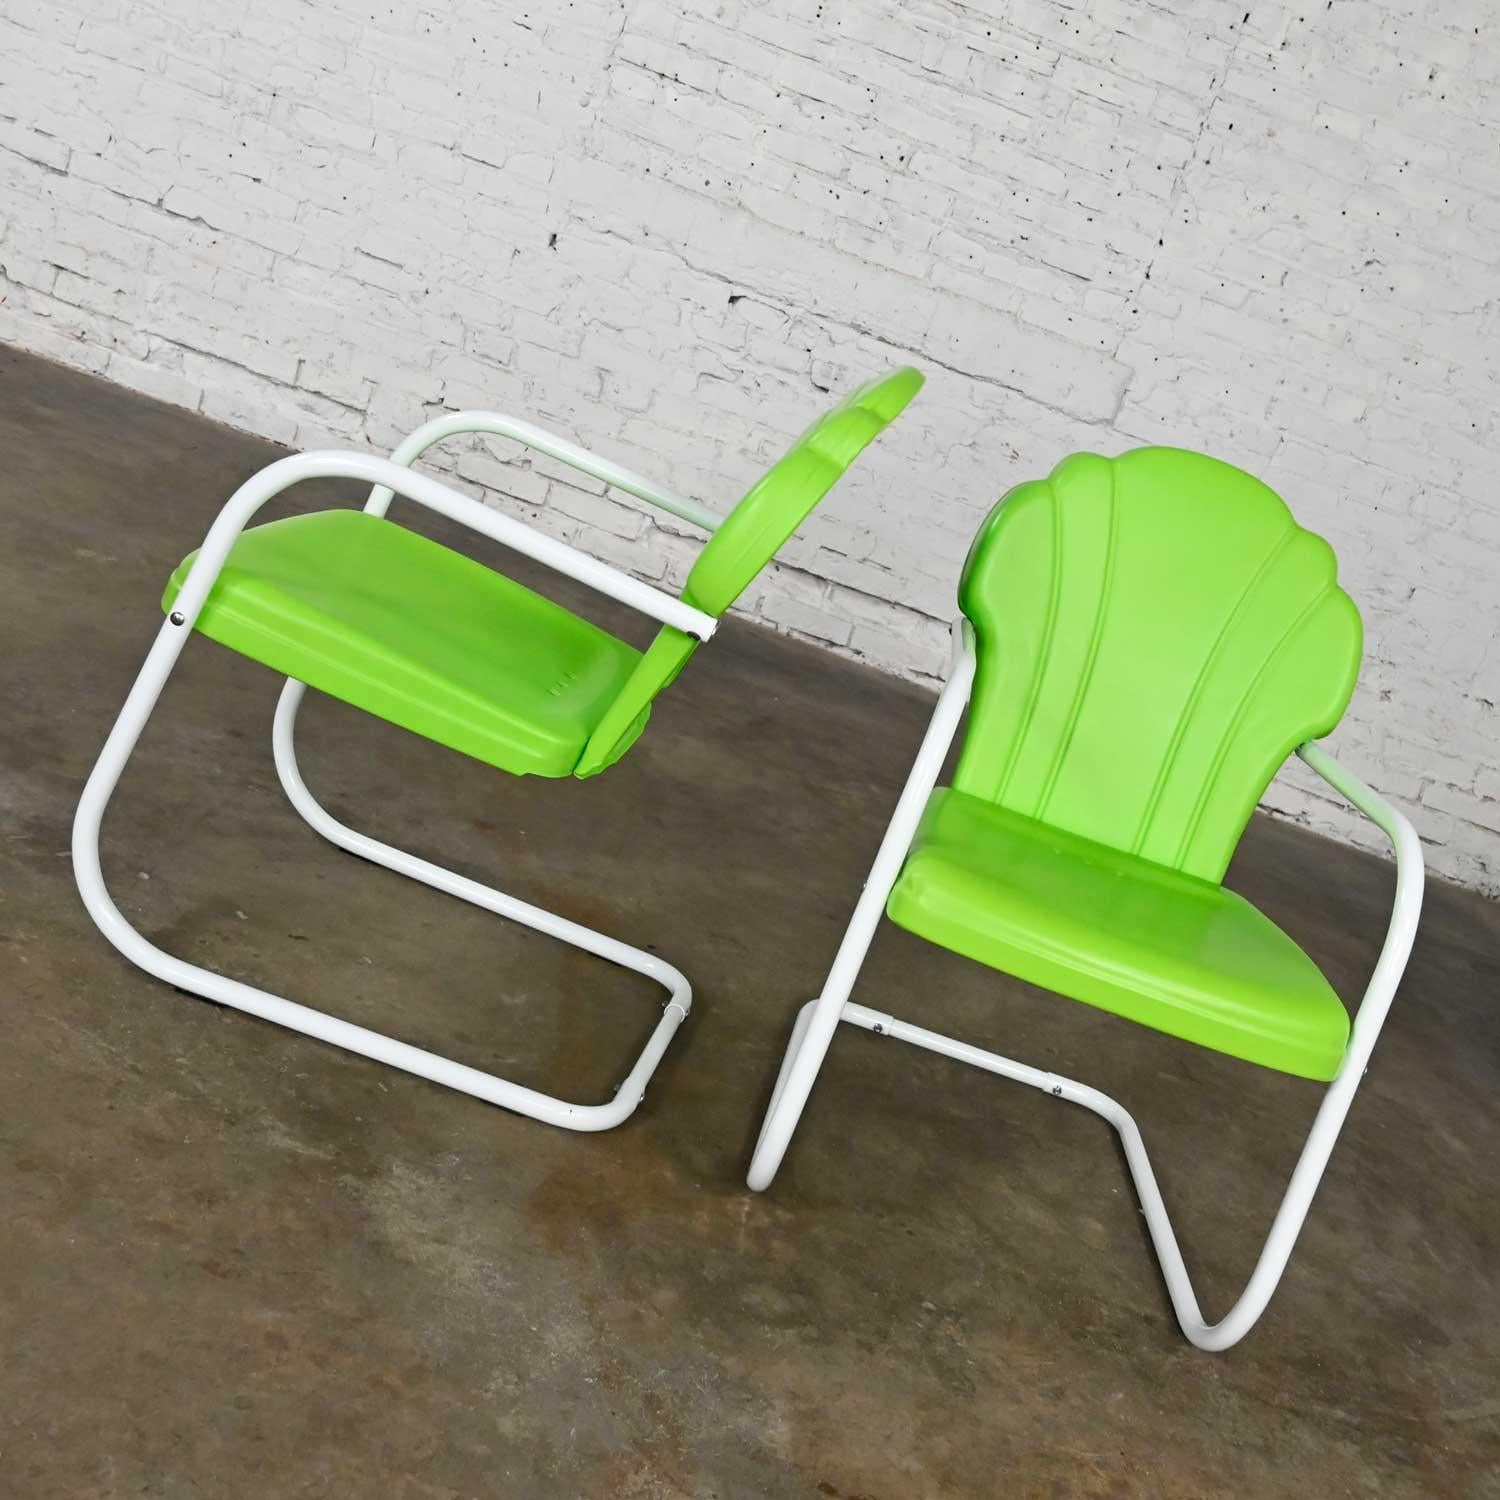 Awesome vintage Mid-Century Modern green & white powder coated metal outdoor cantilever springer chairs. Beautiful condition, keeping in mind that these are vintage and not new so will have signs of use and wear. These chairs have been media blasted